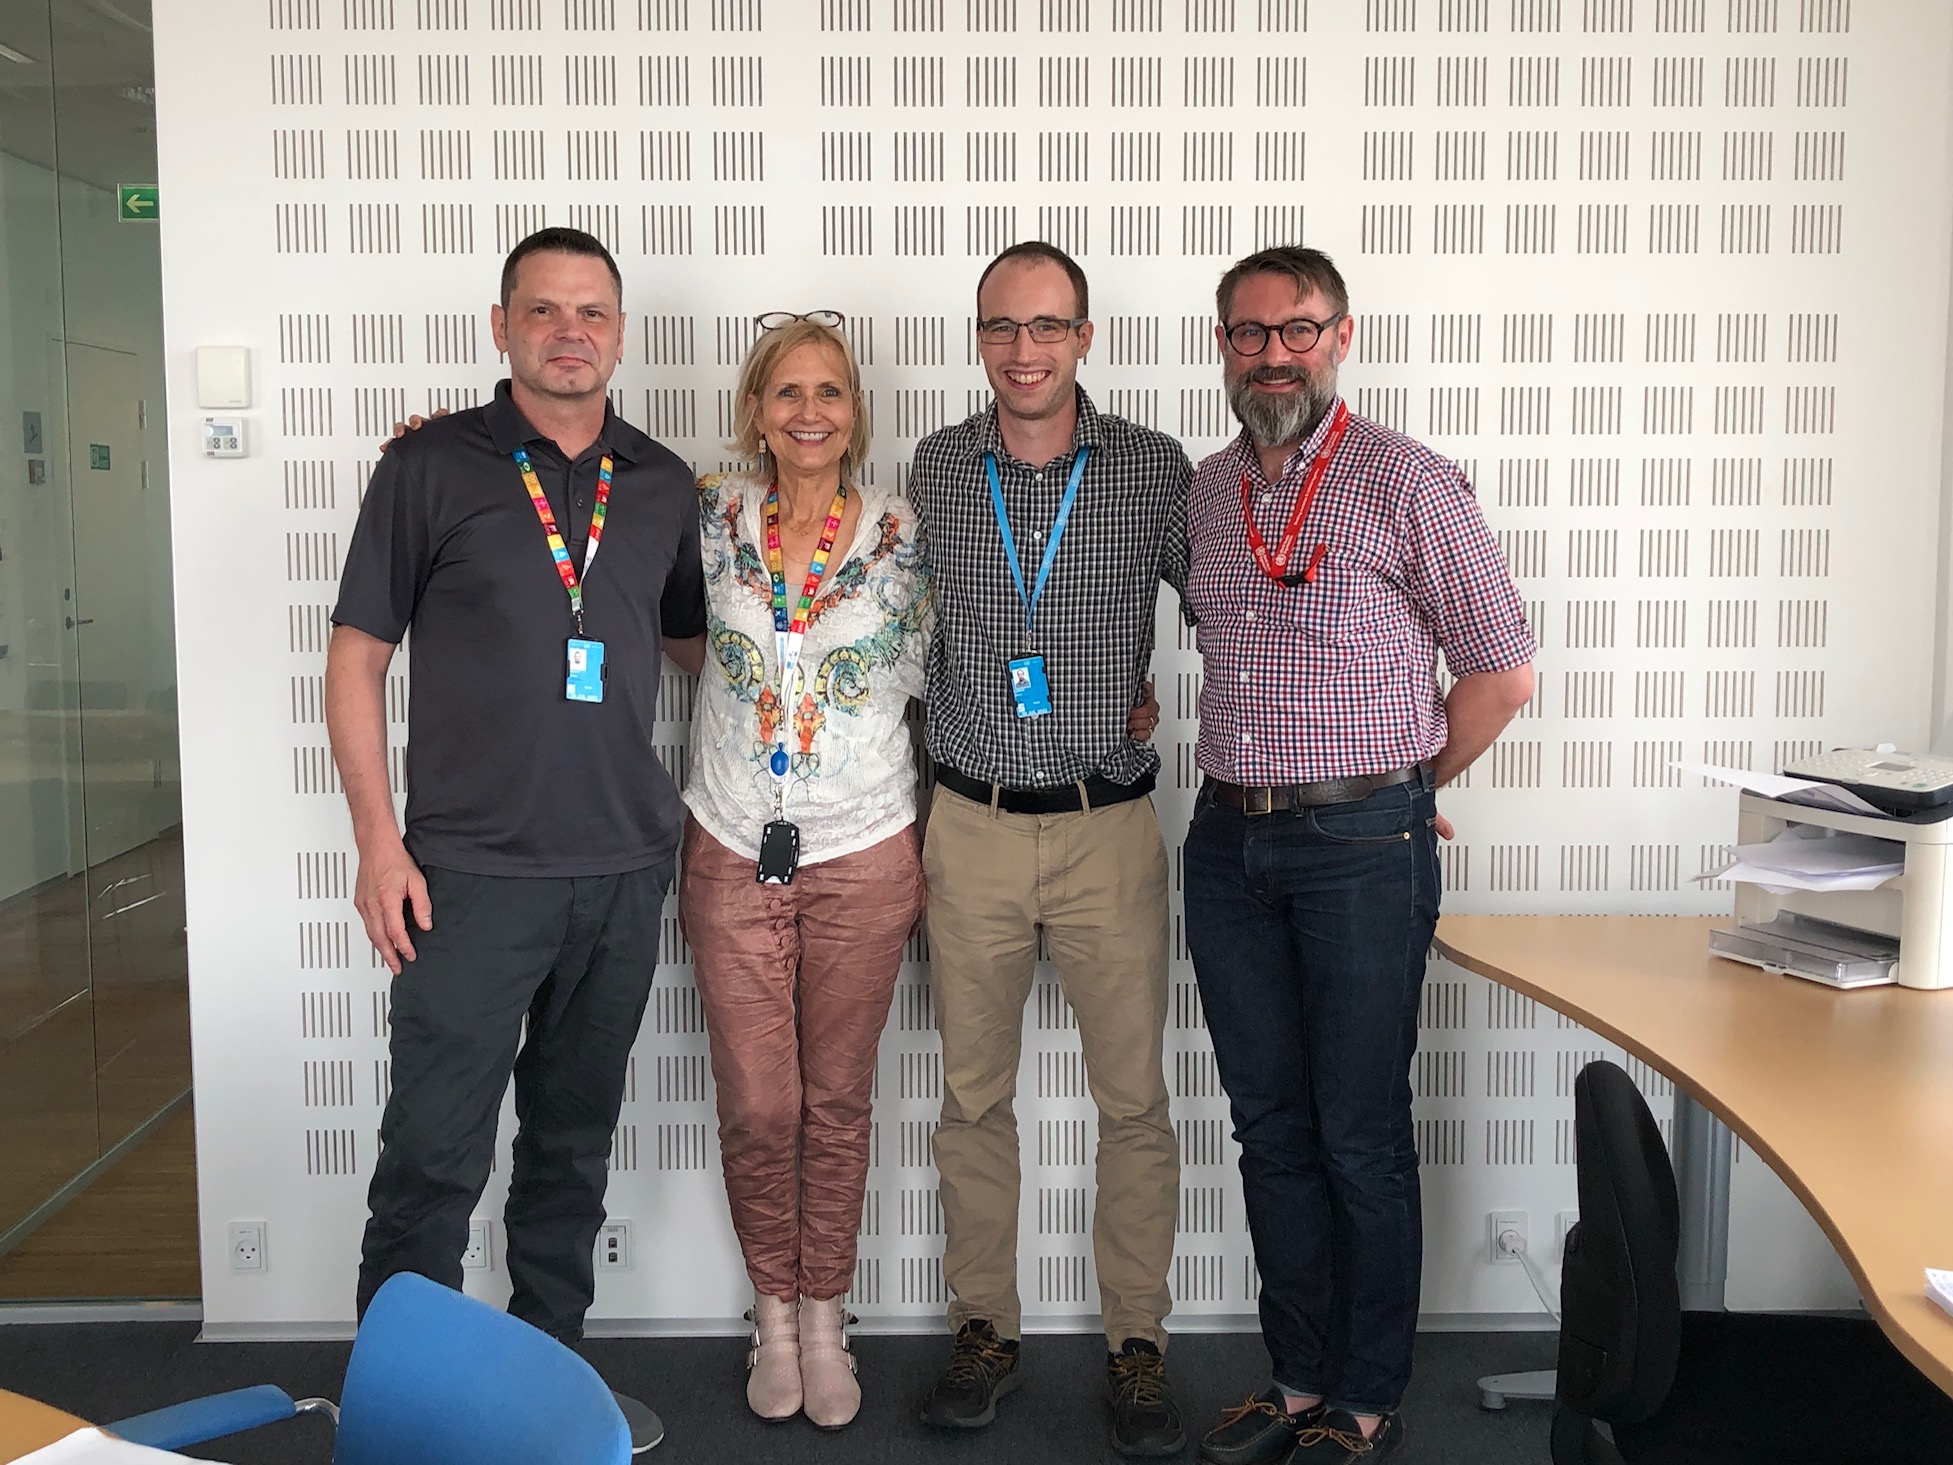 First year student, Bruce Larkin (2nd right) at WHO in Copenhagen with Alumnus, Dr. Patrick O'Connor (right) and Dr. Dorit Nitzan